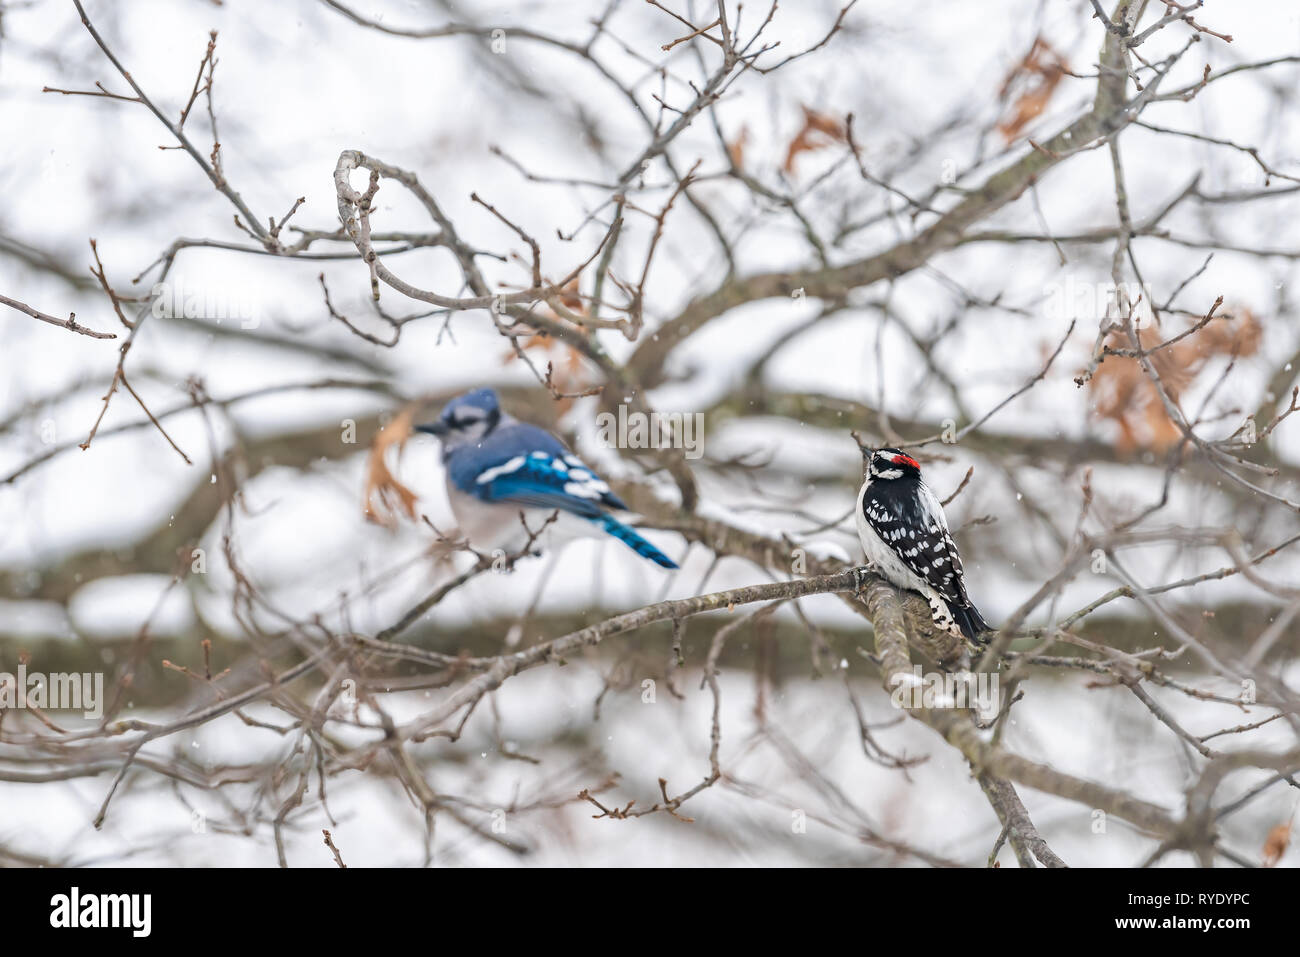 Closeup of two birds friends perched together with blue jay, Cyanocitta cristata, and downy or hairy woodpecker sitting on oak tree during winter in V Stock Photo